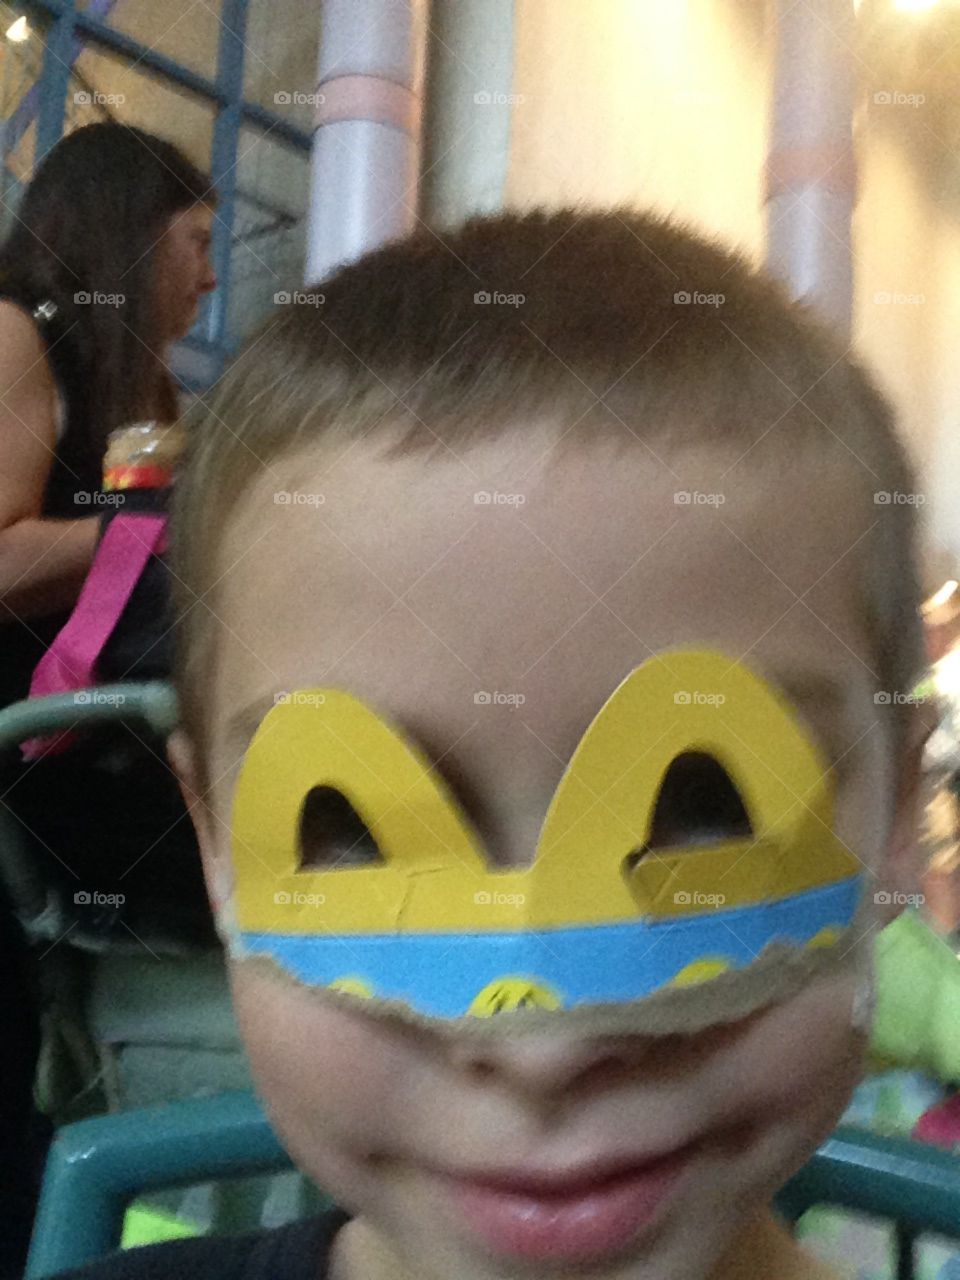 Golden Arches mask